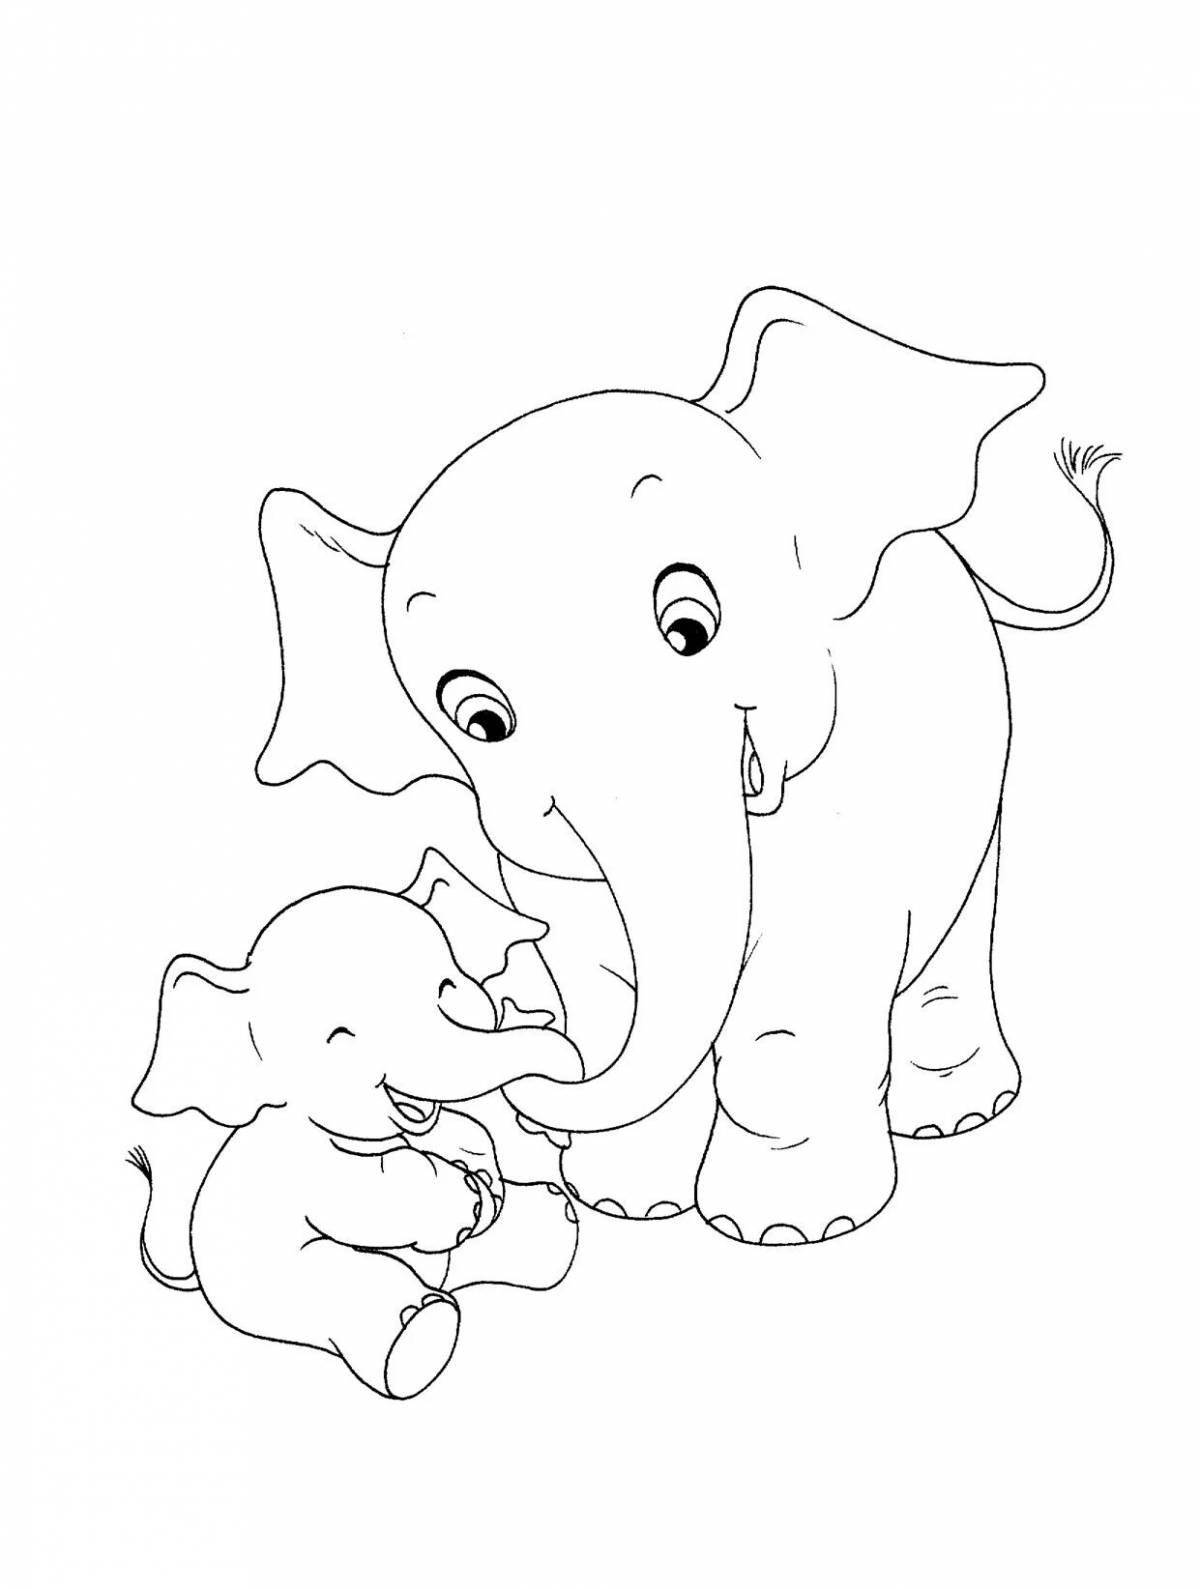 Great elephant coloring book for kids